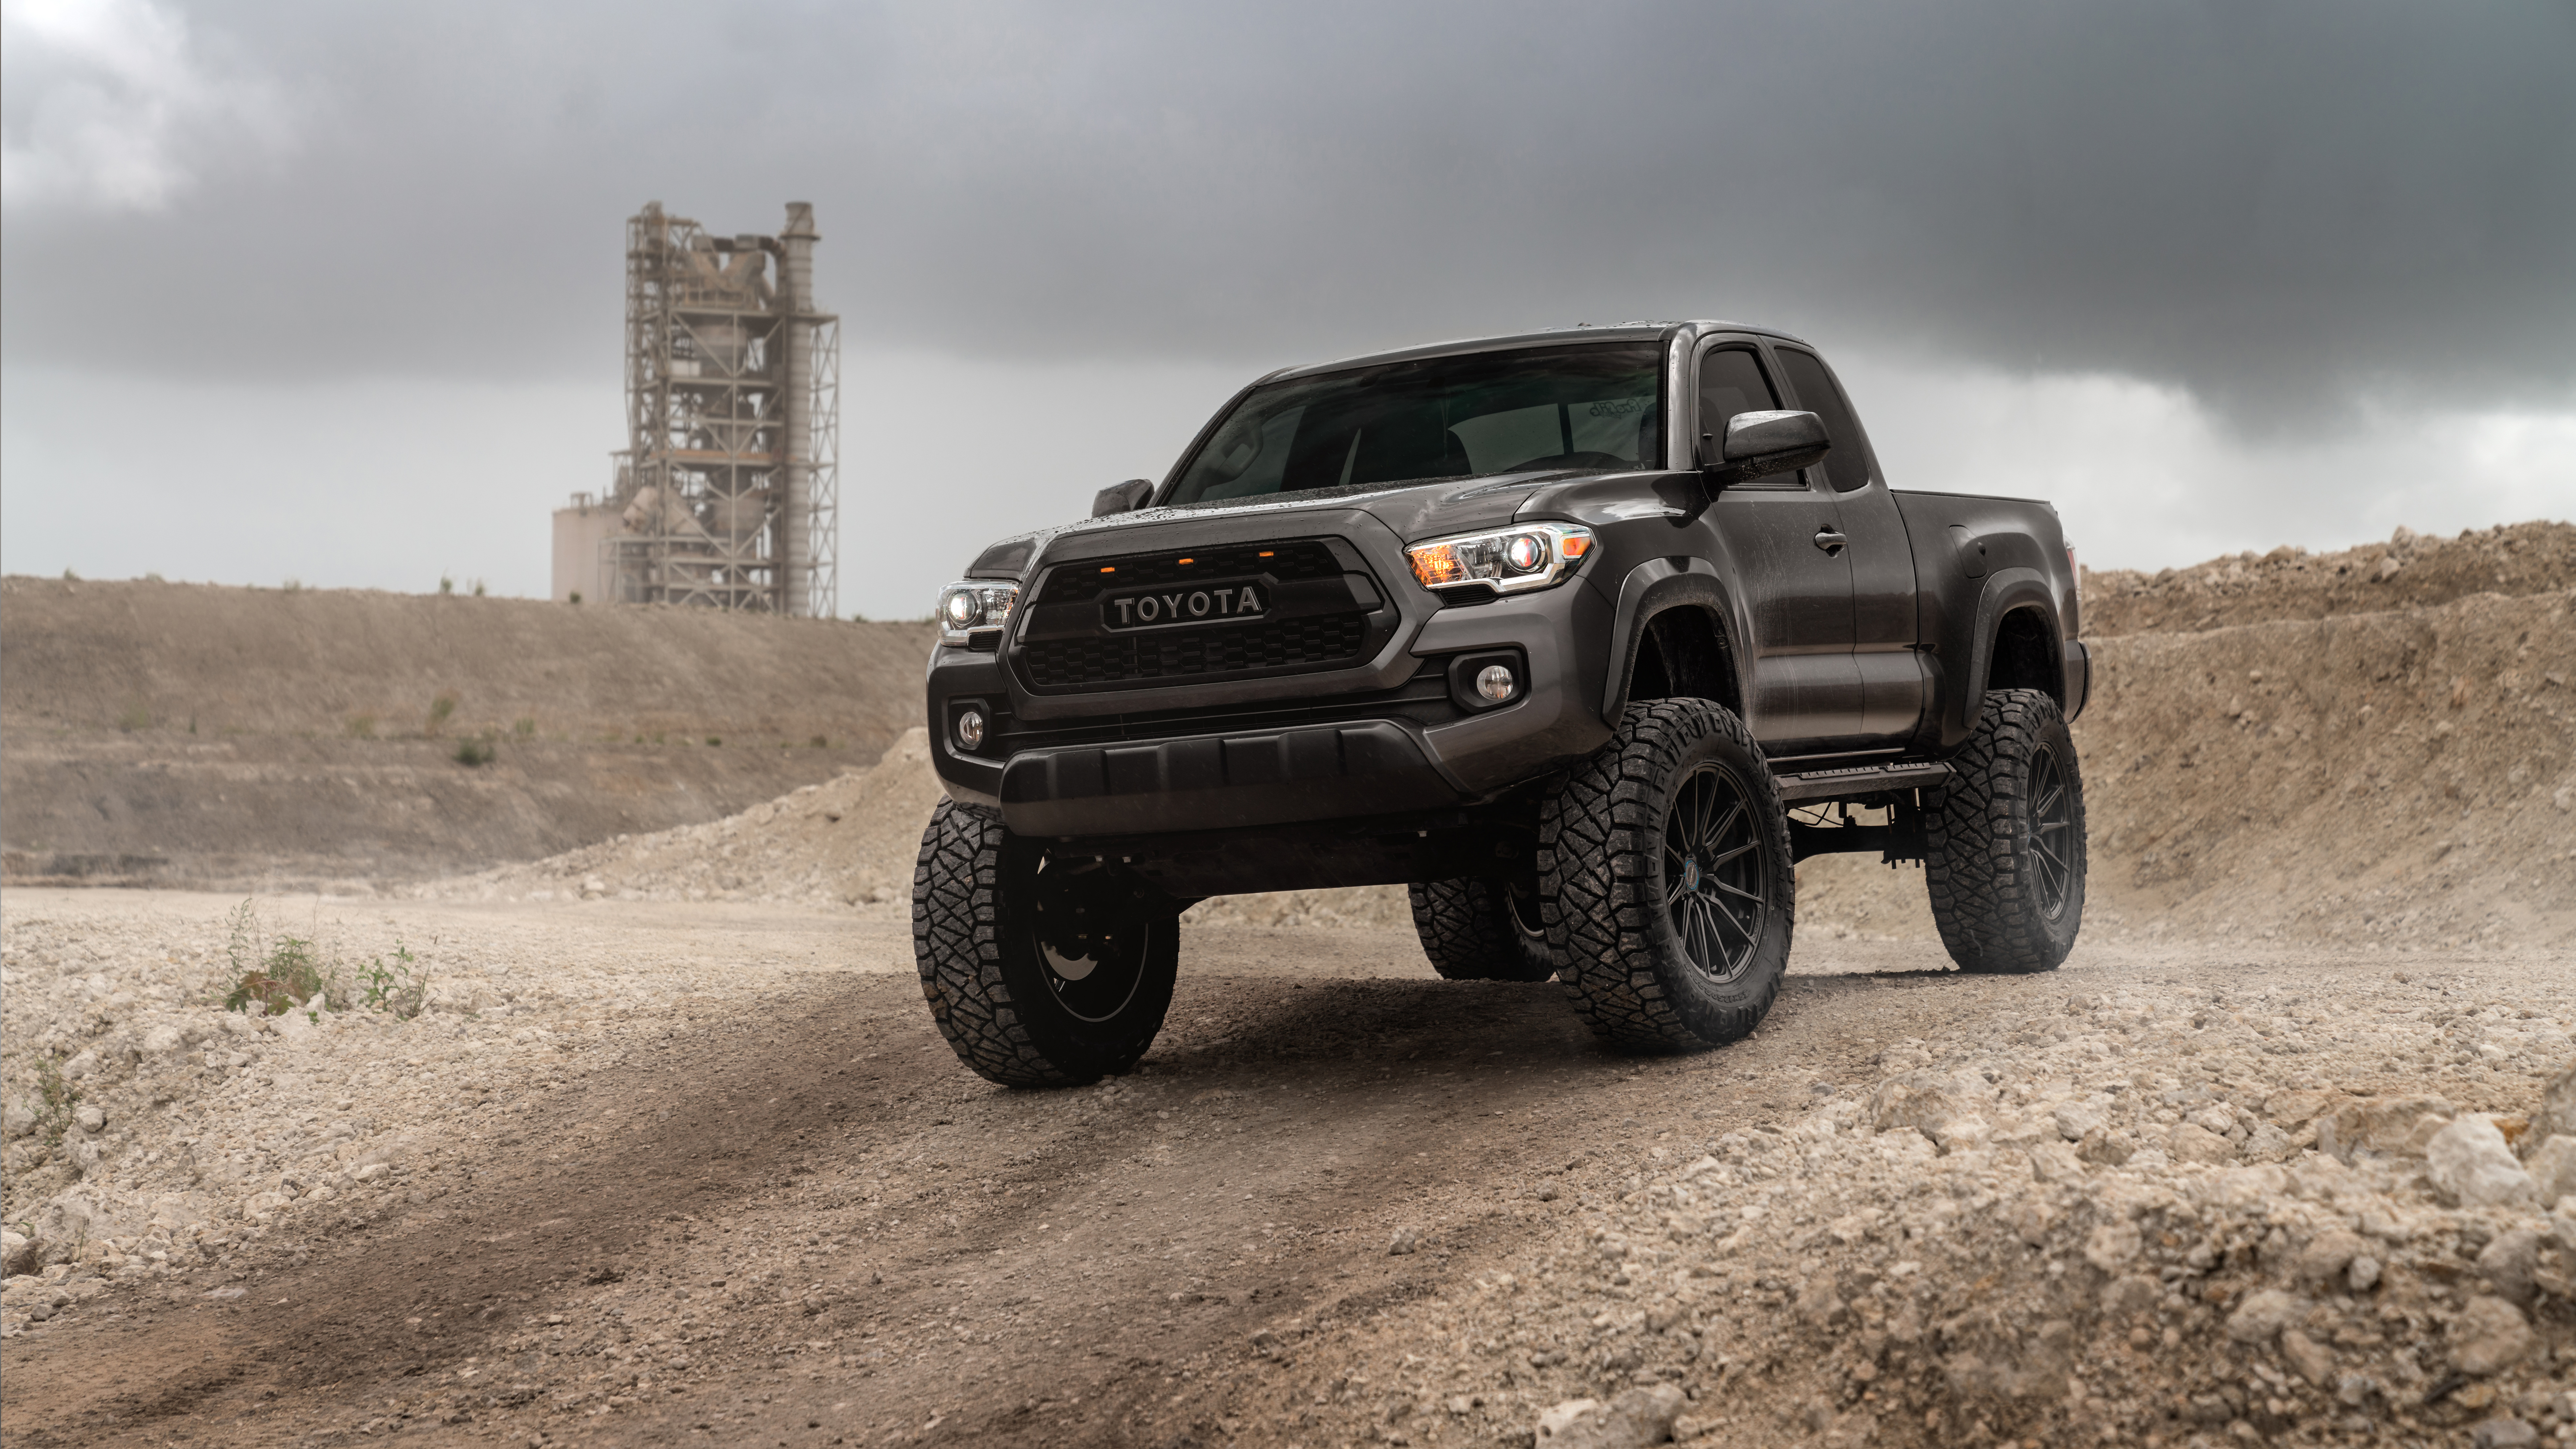 7680x4320 Toyota Tacoma Off Road 8k 8k Hd 4k Wallpapers Images Backgrounds Photos And Pictures